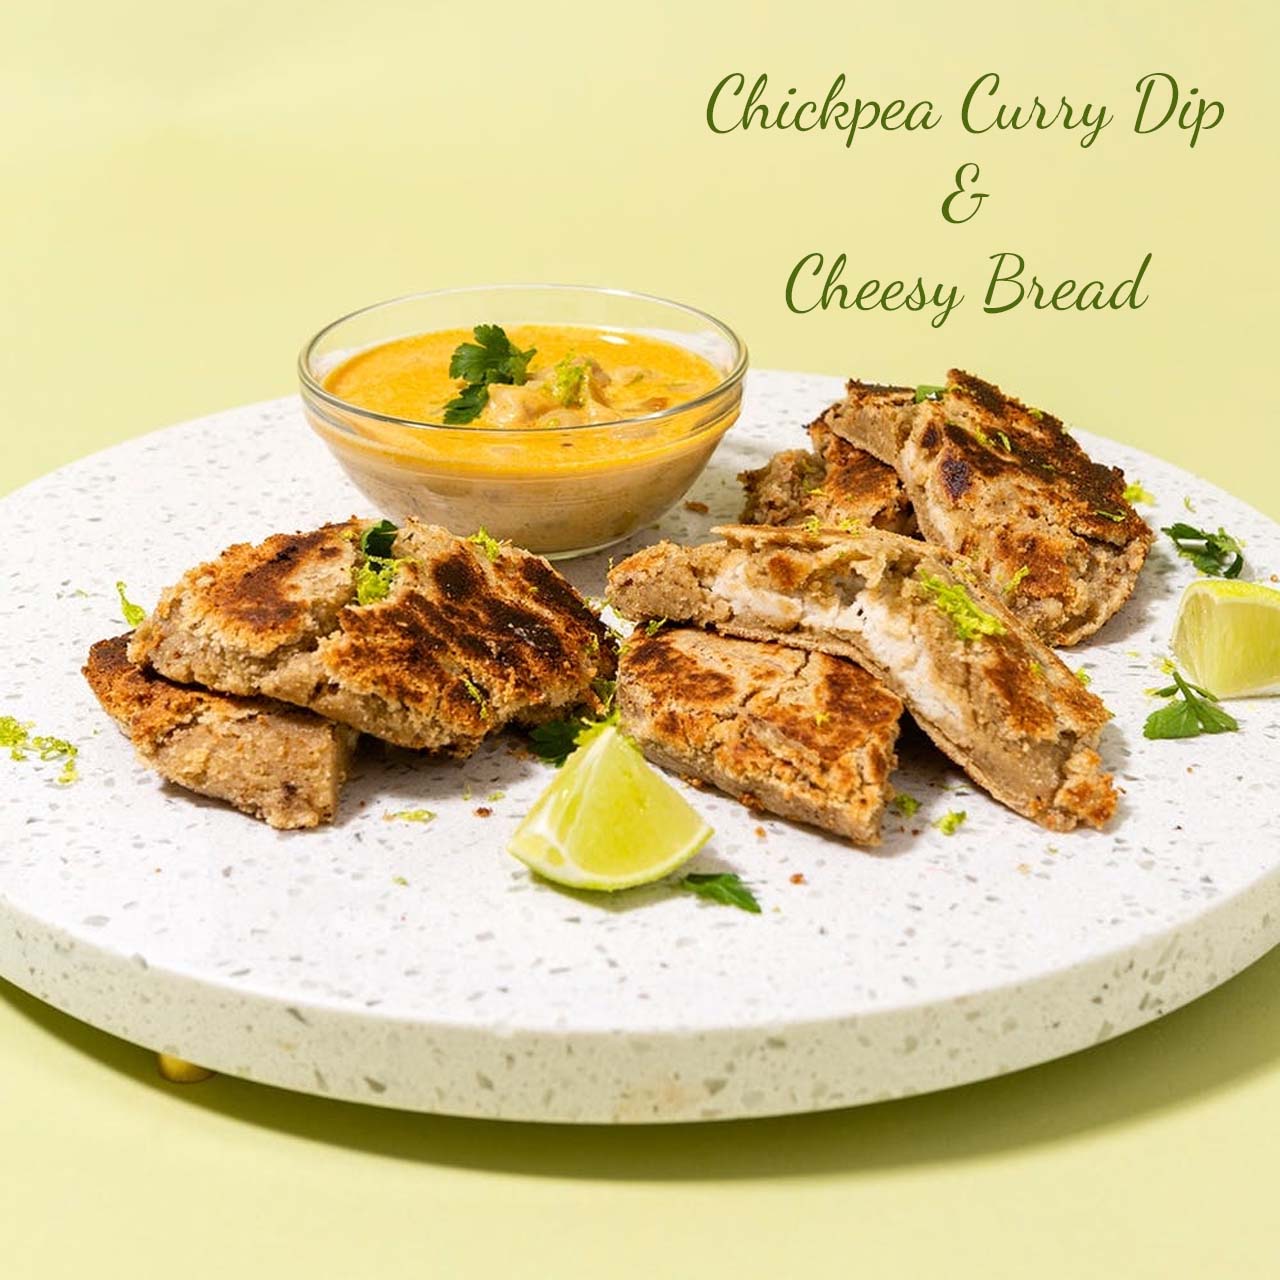 Vegan cheesy bread with chickpea curry dip